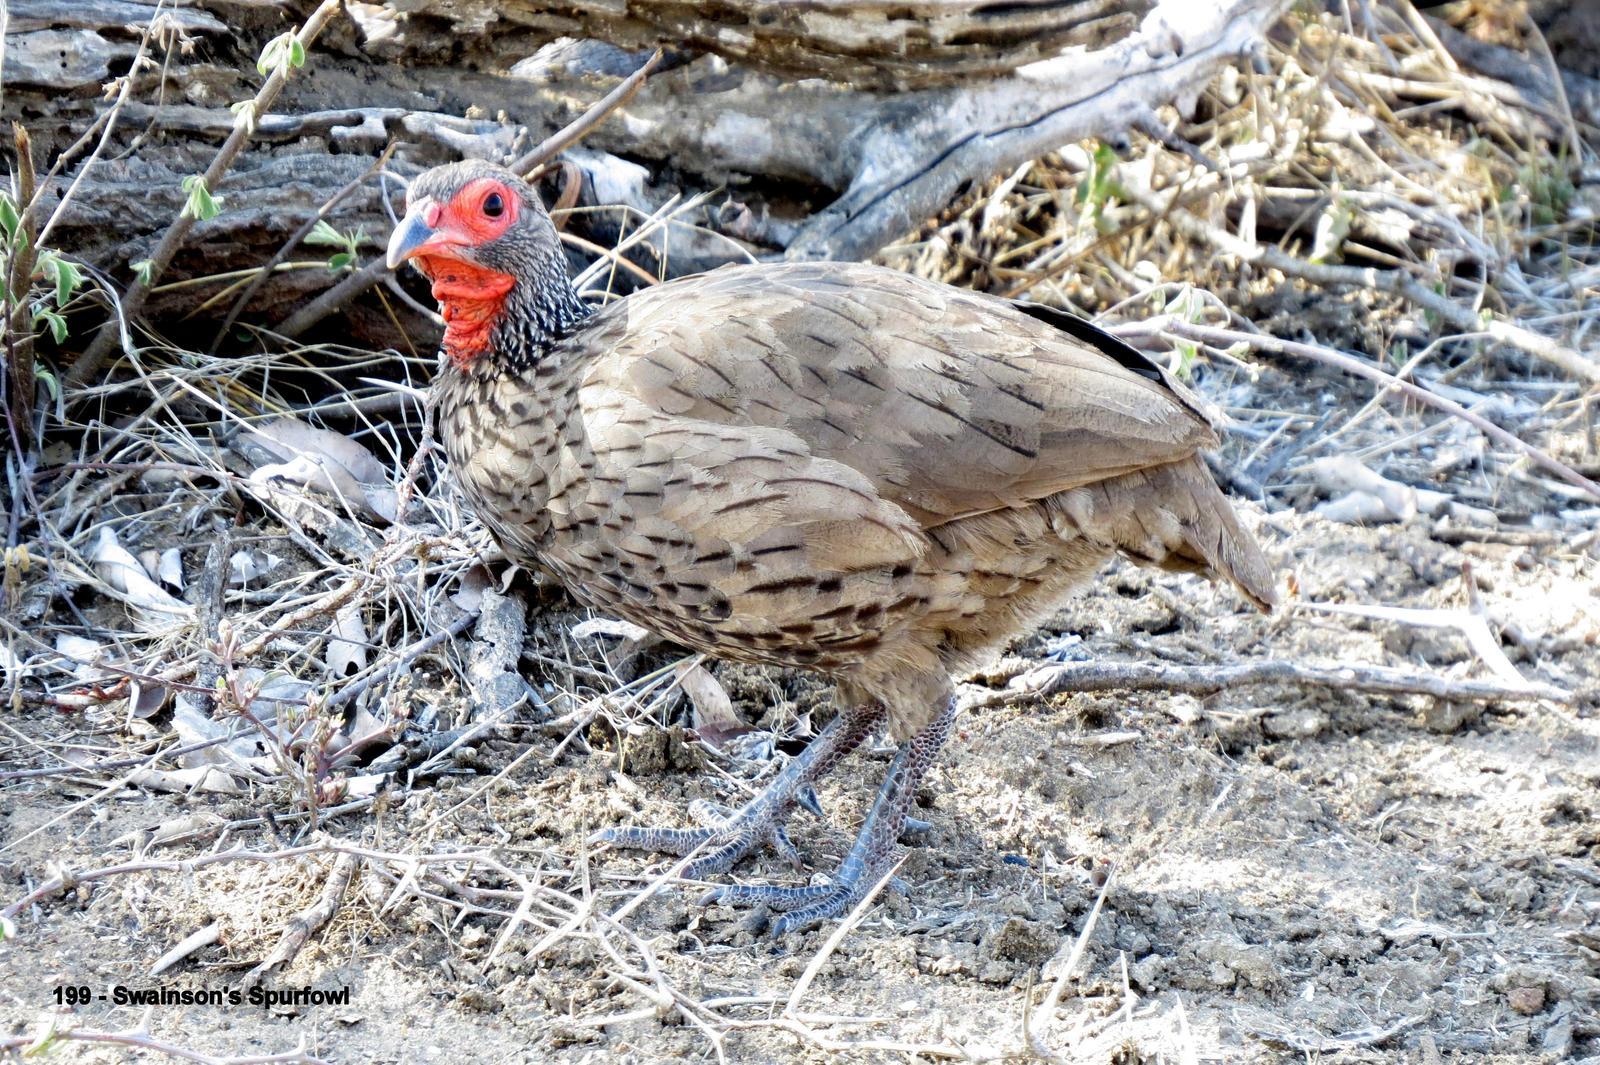 Swainson's Francolin Photo by Richard  Lowe